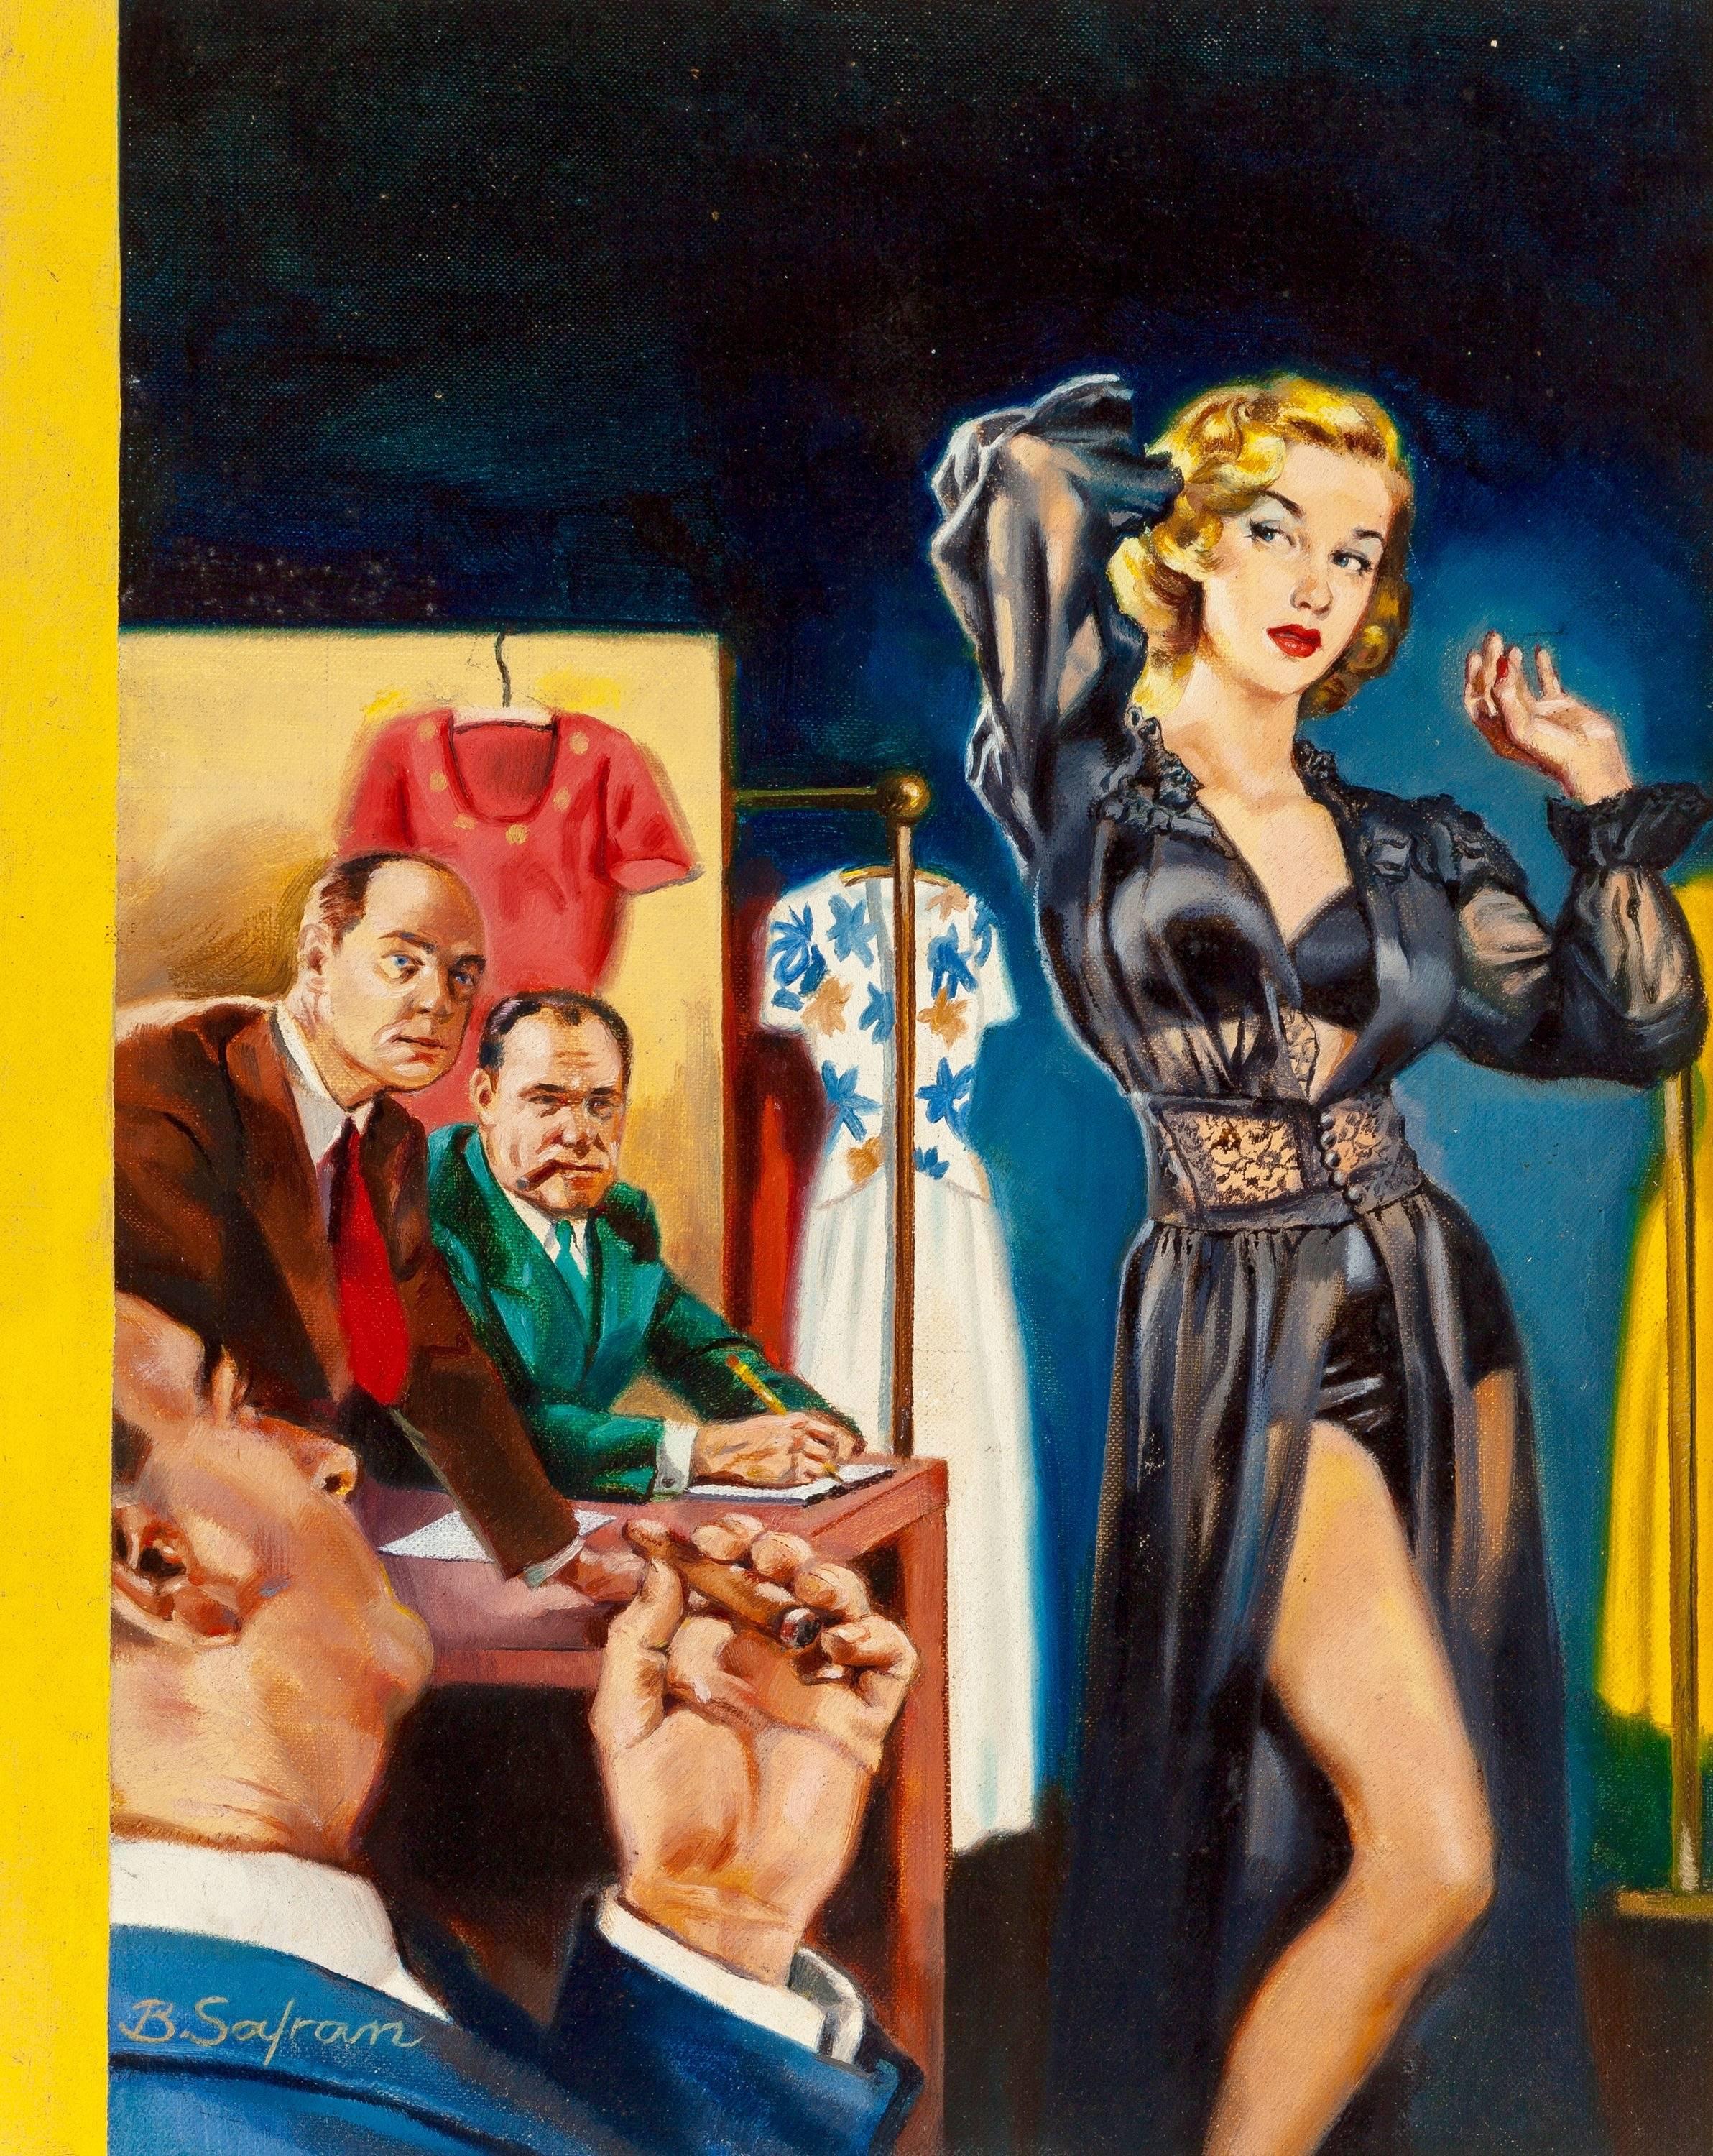 Bernard Safran Figurative Painting - The Indiscretions of a French Model, Paperback Cover